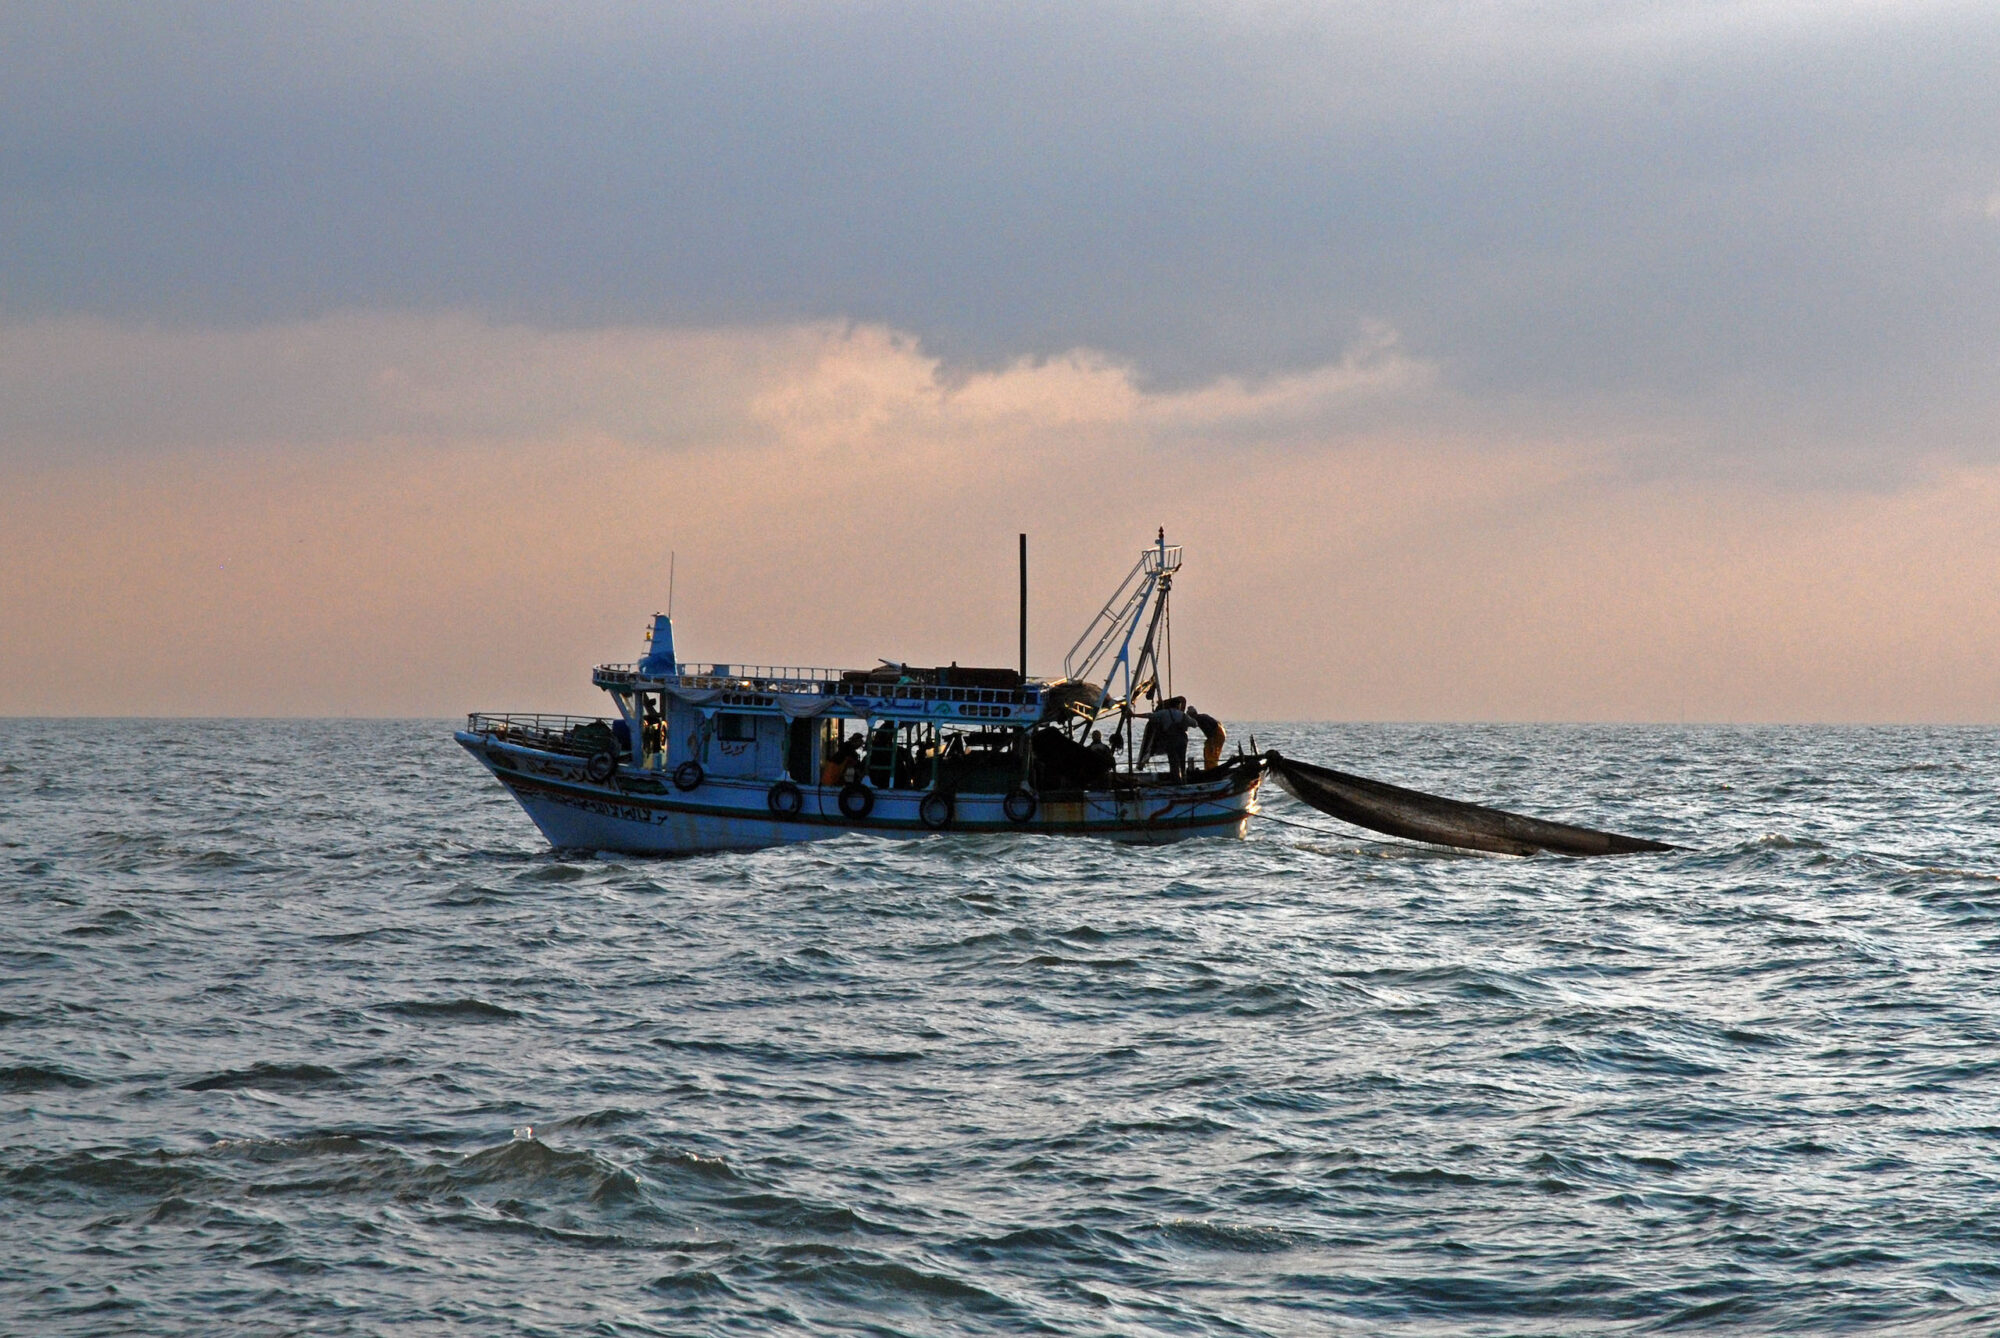 A trawler in Egypt, used to catch small fish species. Research shows that bottom trawling releases as much carbon from the seabed as the entire aviation industry